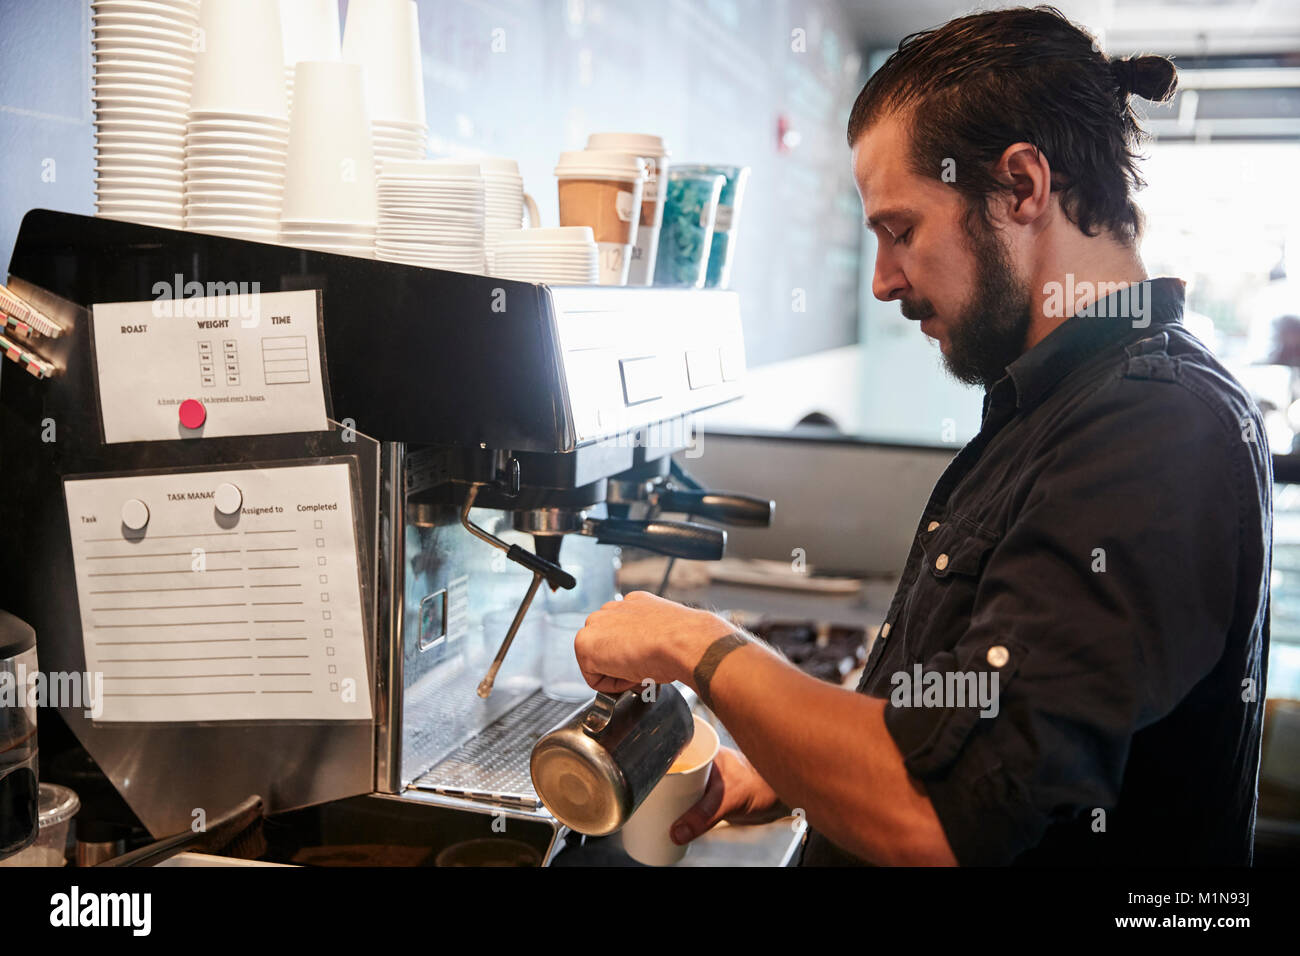 Male Barista Using Coffee Machine Behind Counter In Cafe Stock Photo